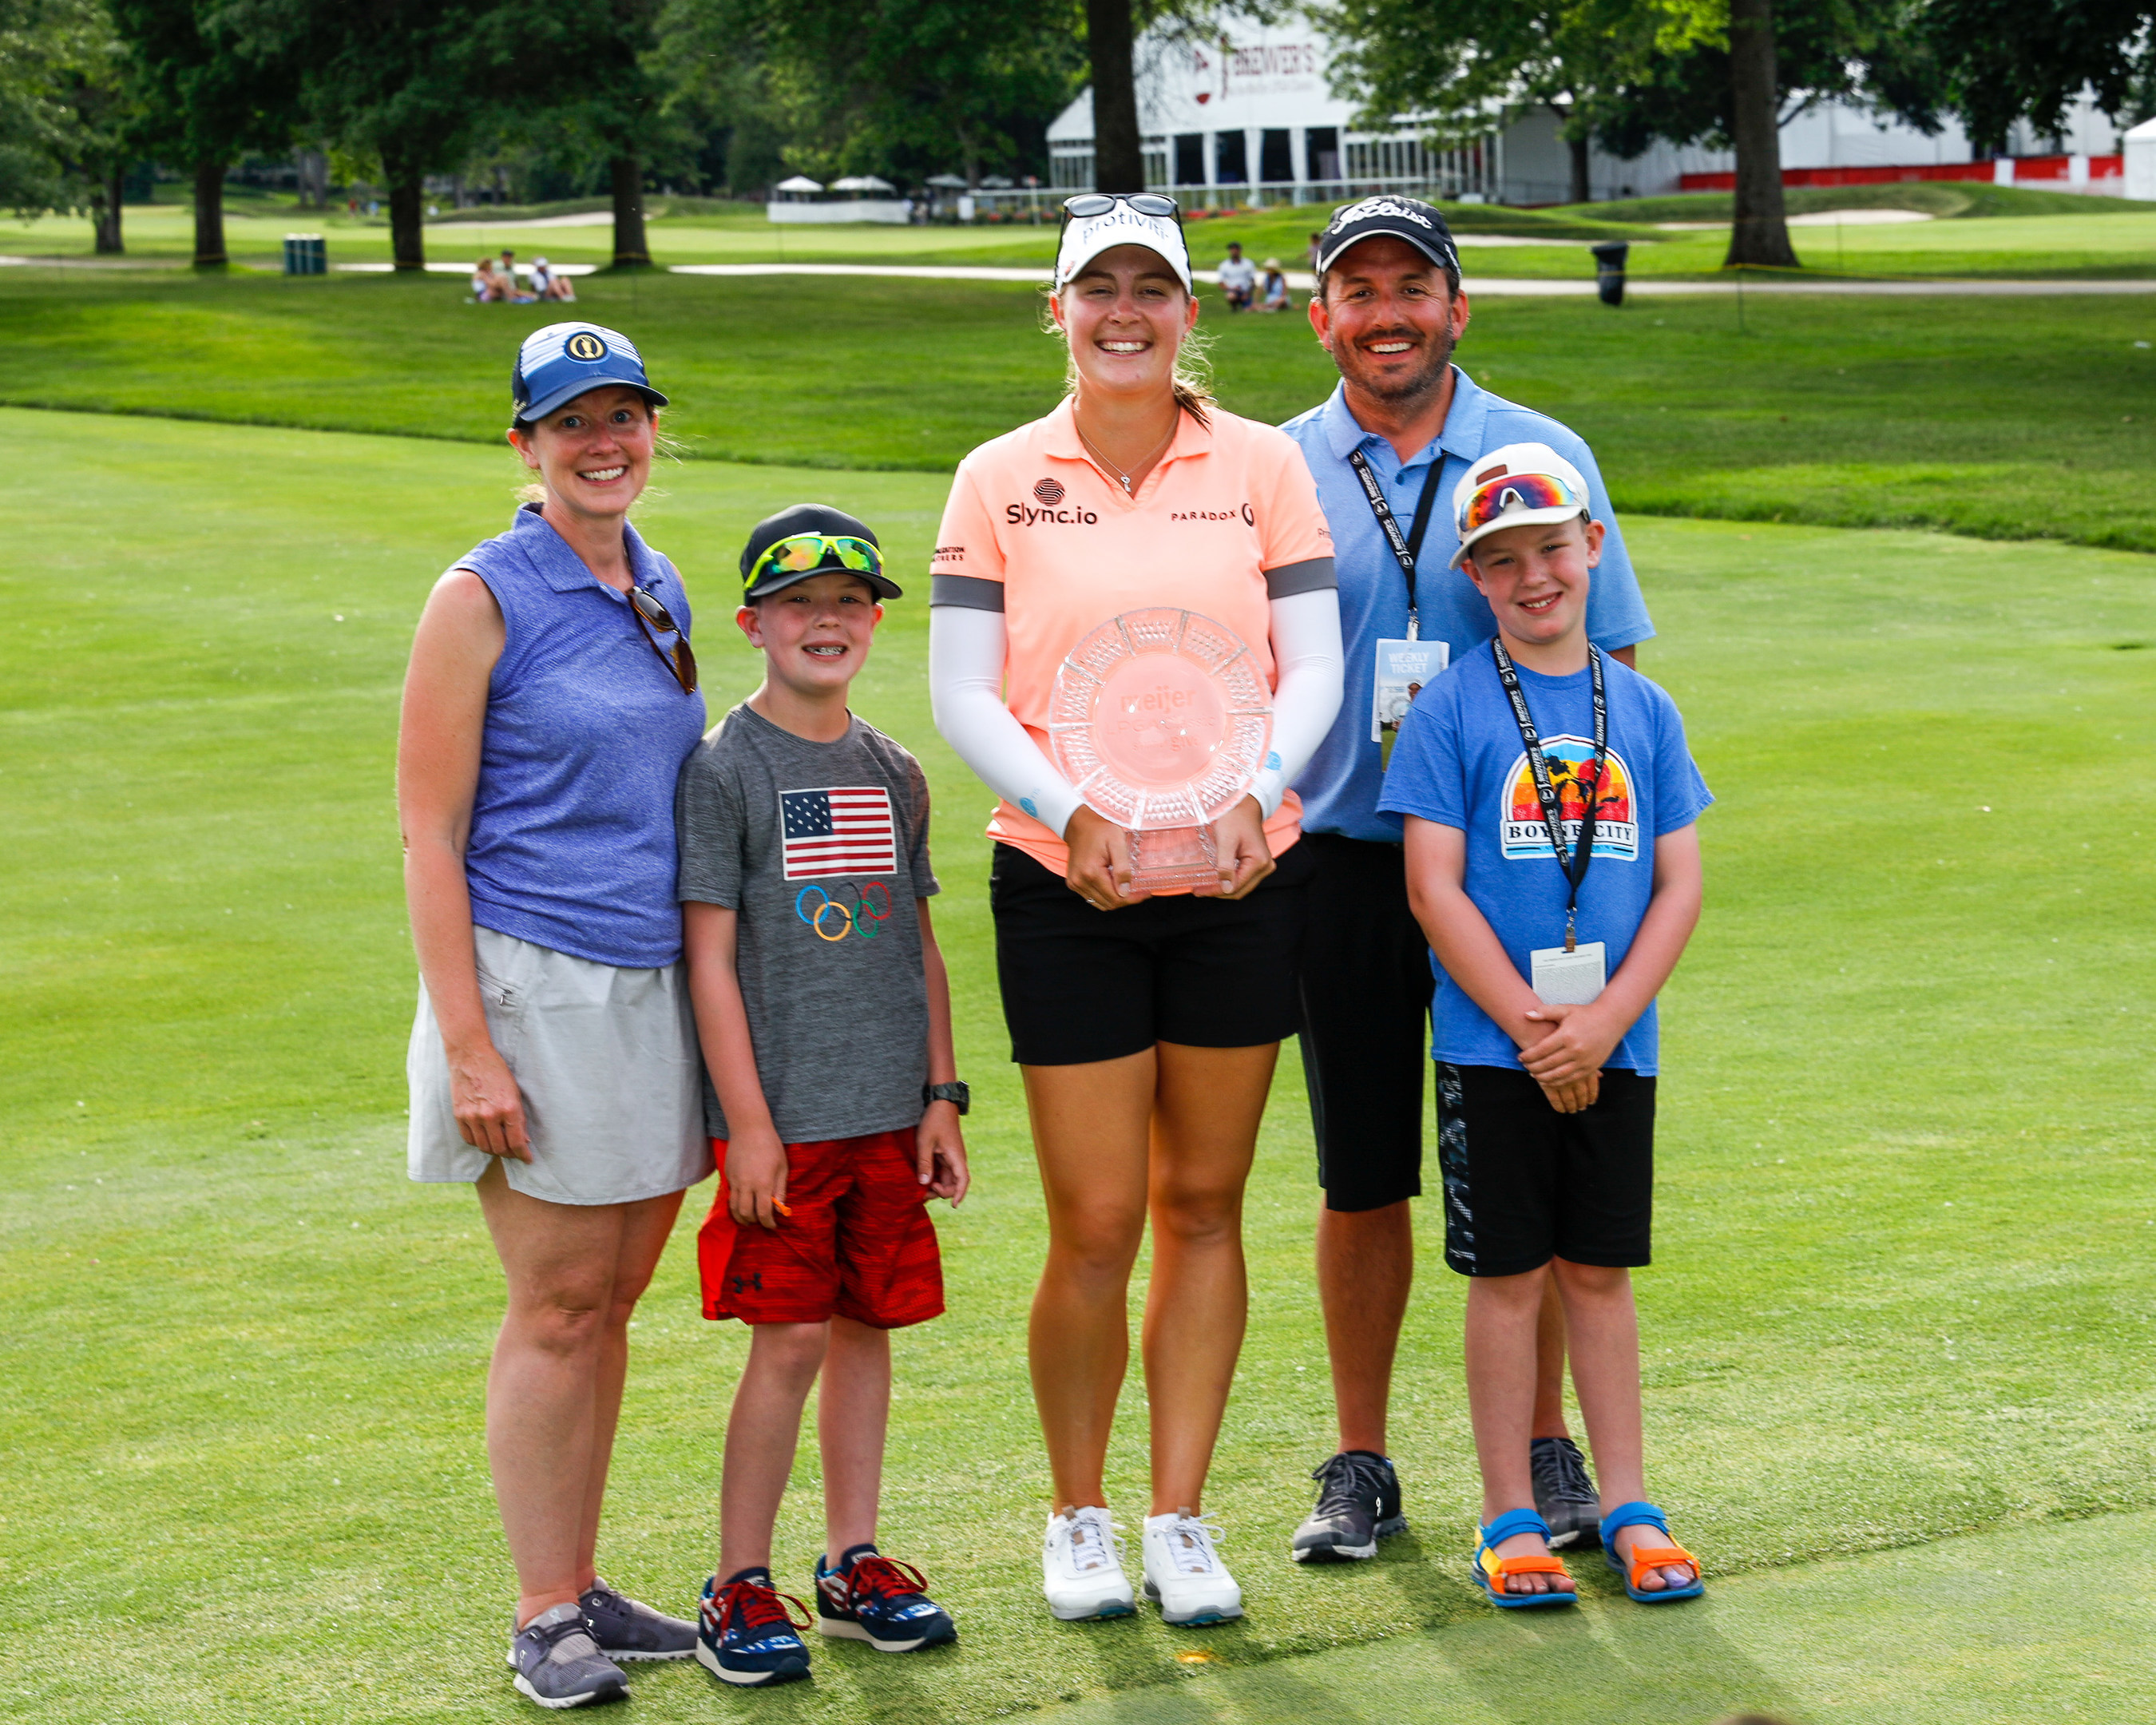  Meijer LPGA Classic for Simply Give to Donate $25,000 to Kids' Food Basket on Behalf of Champion Jennifer Kupcho After Record-Setting Community Support 